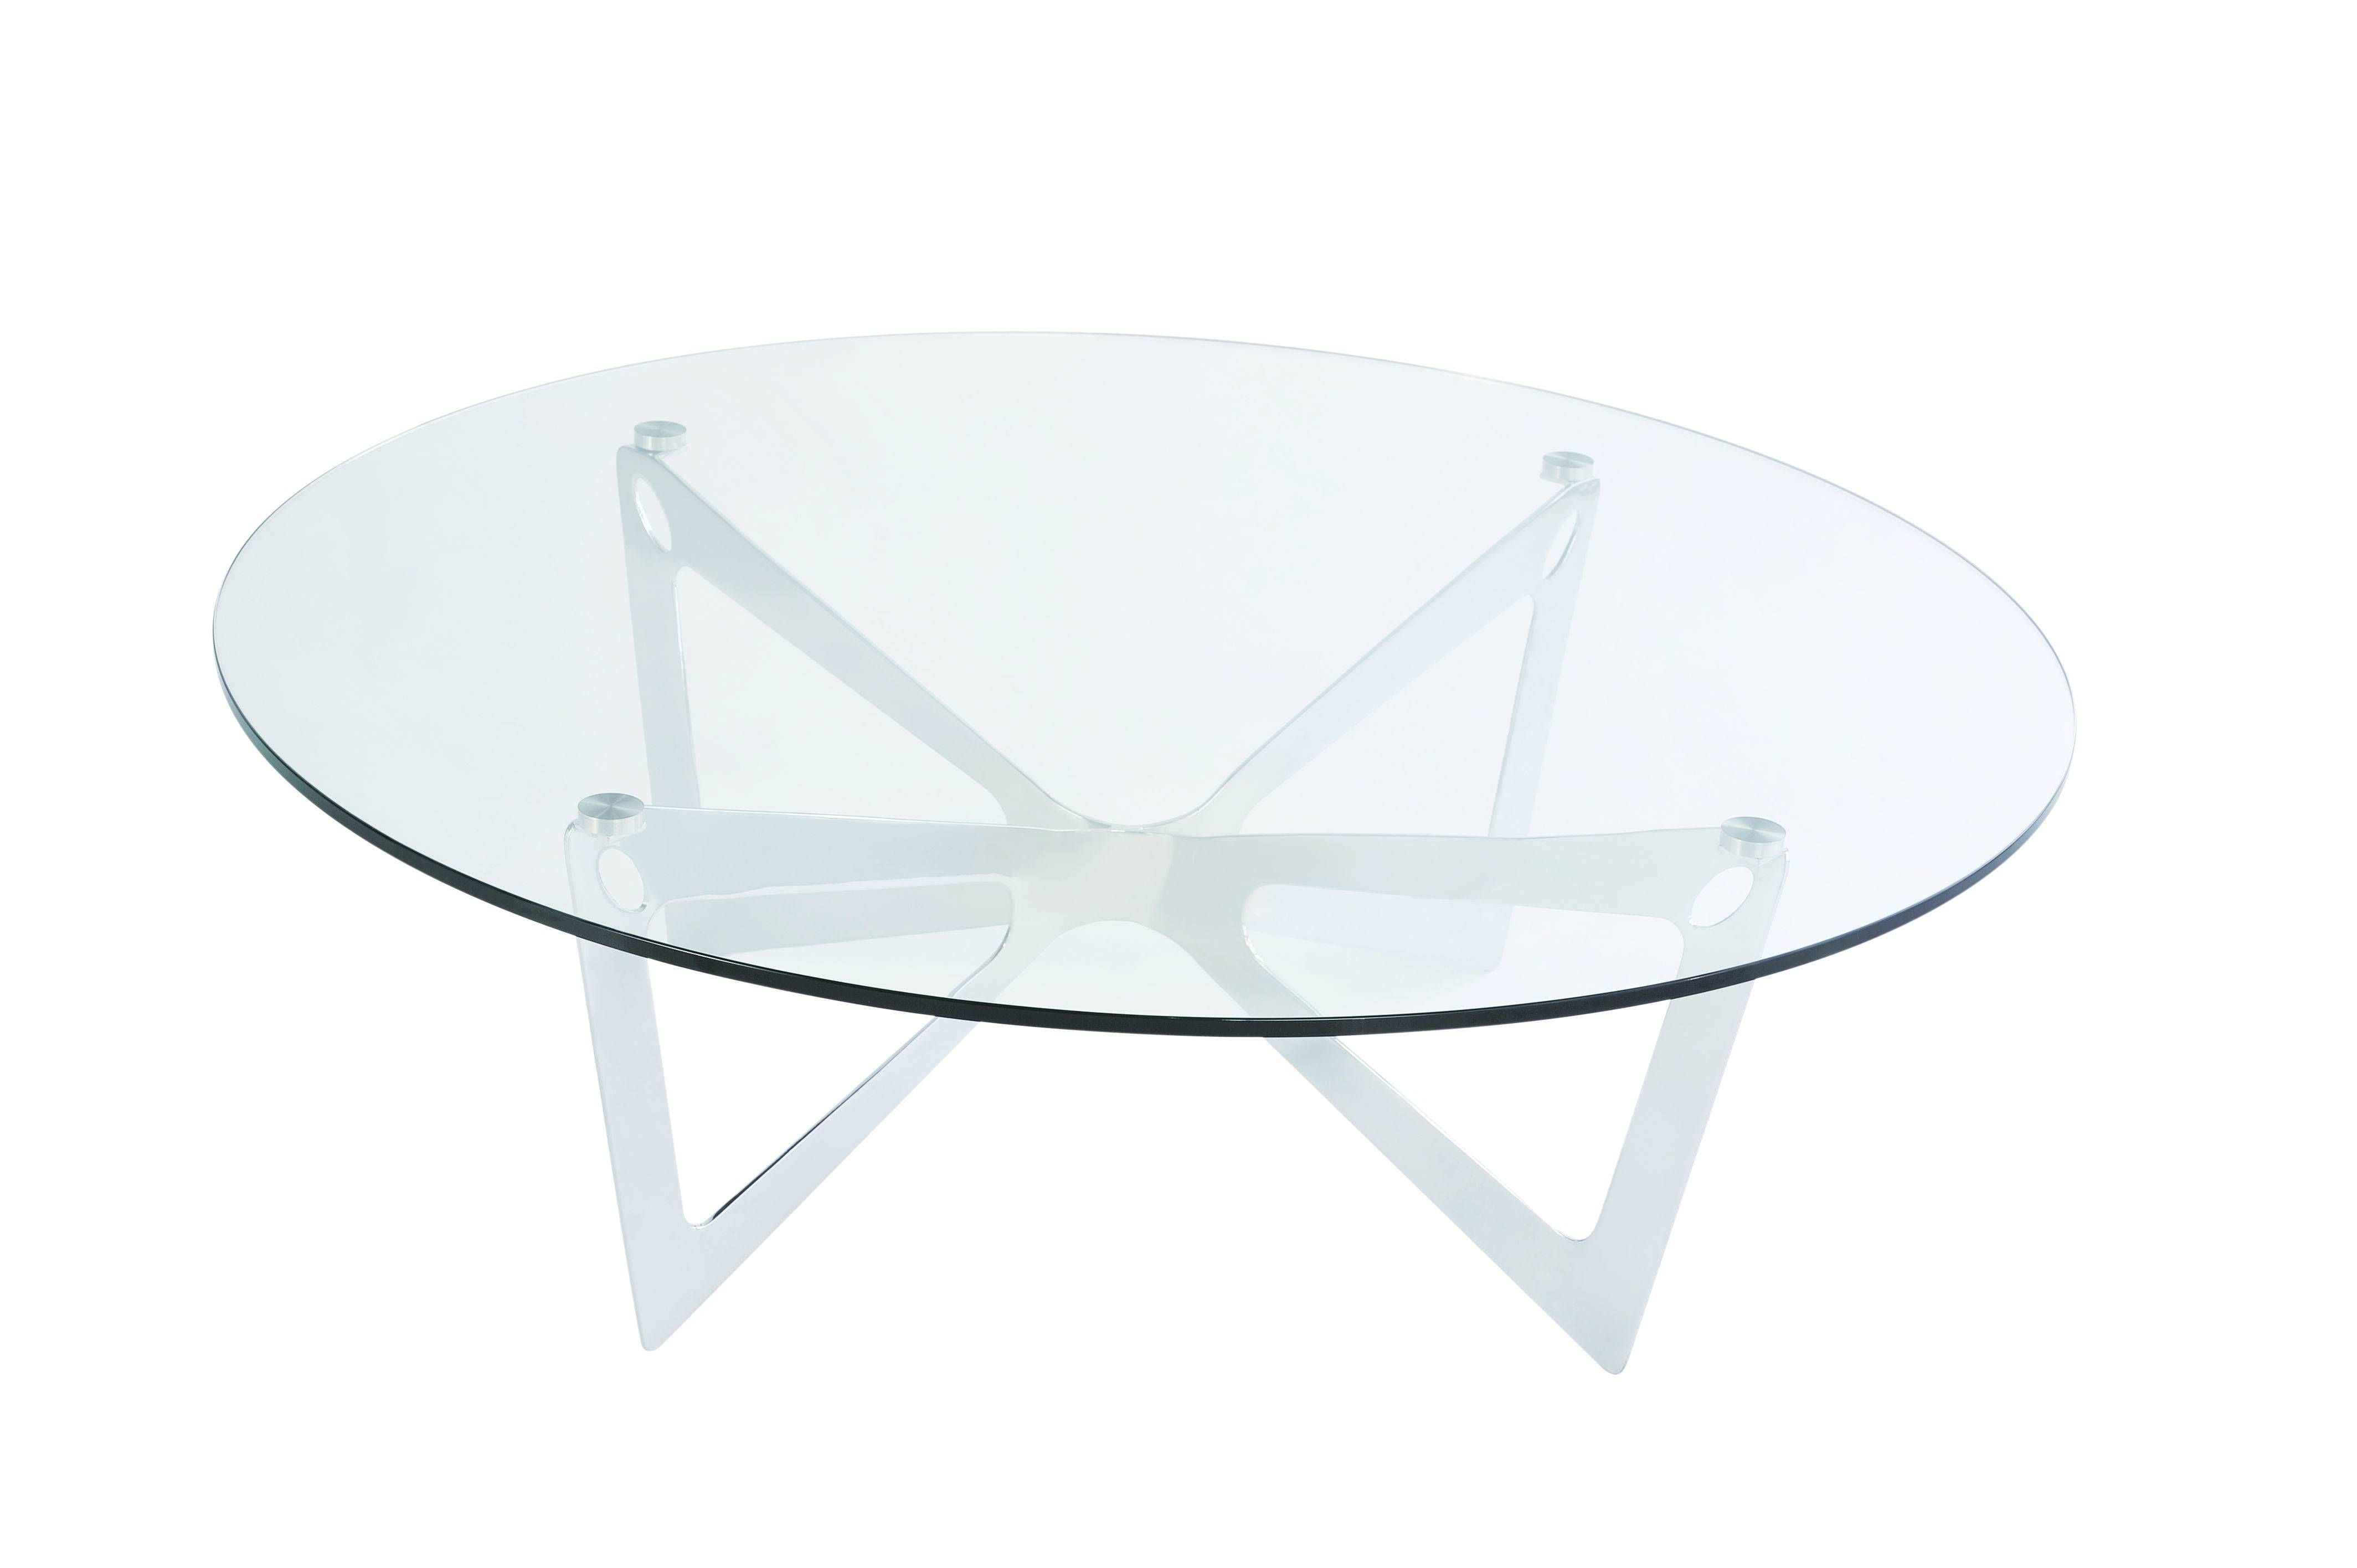 Granite Coffee Tables | Coffee Table Decoration Inside Glass Circle Coffee Tables (View 23 of 30)